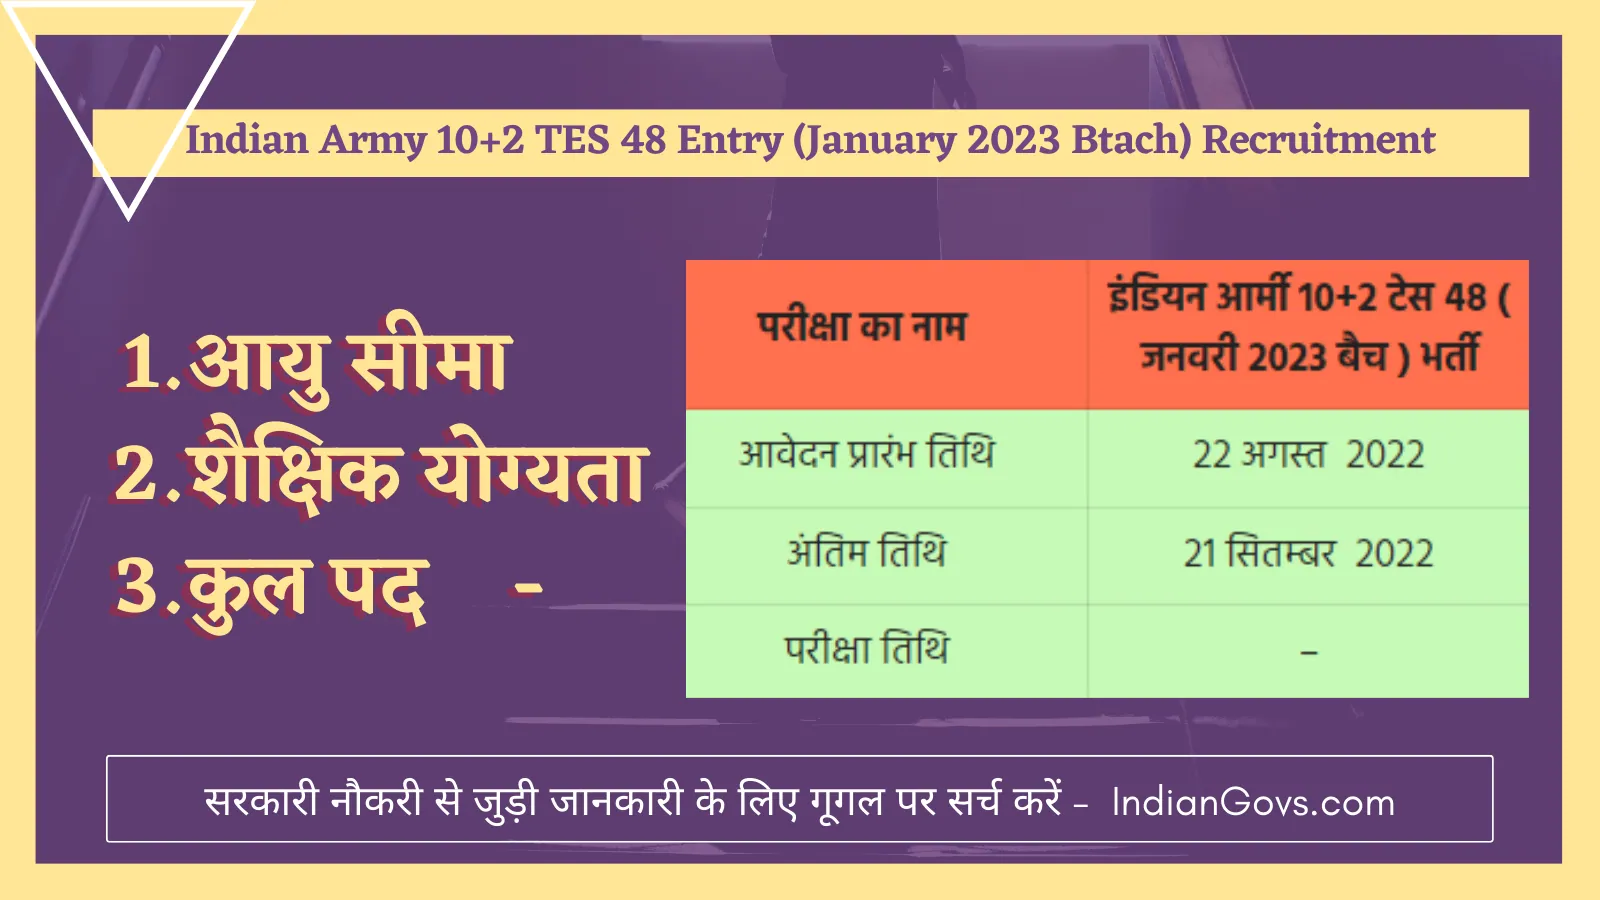 Indian Army 10+2 TES 48 Entry (January 2023 Btach) Recruitment